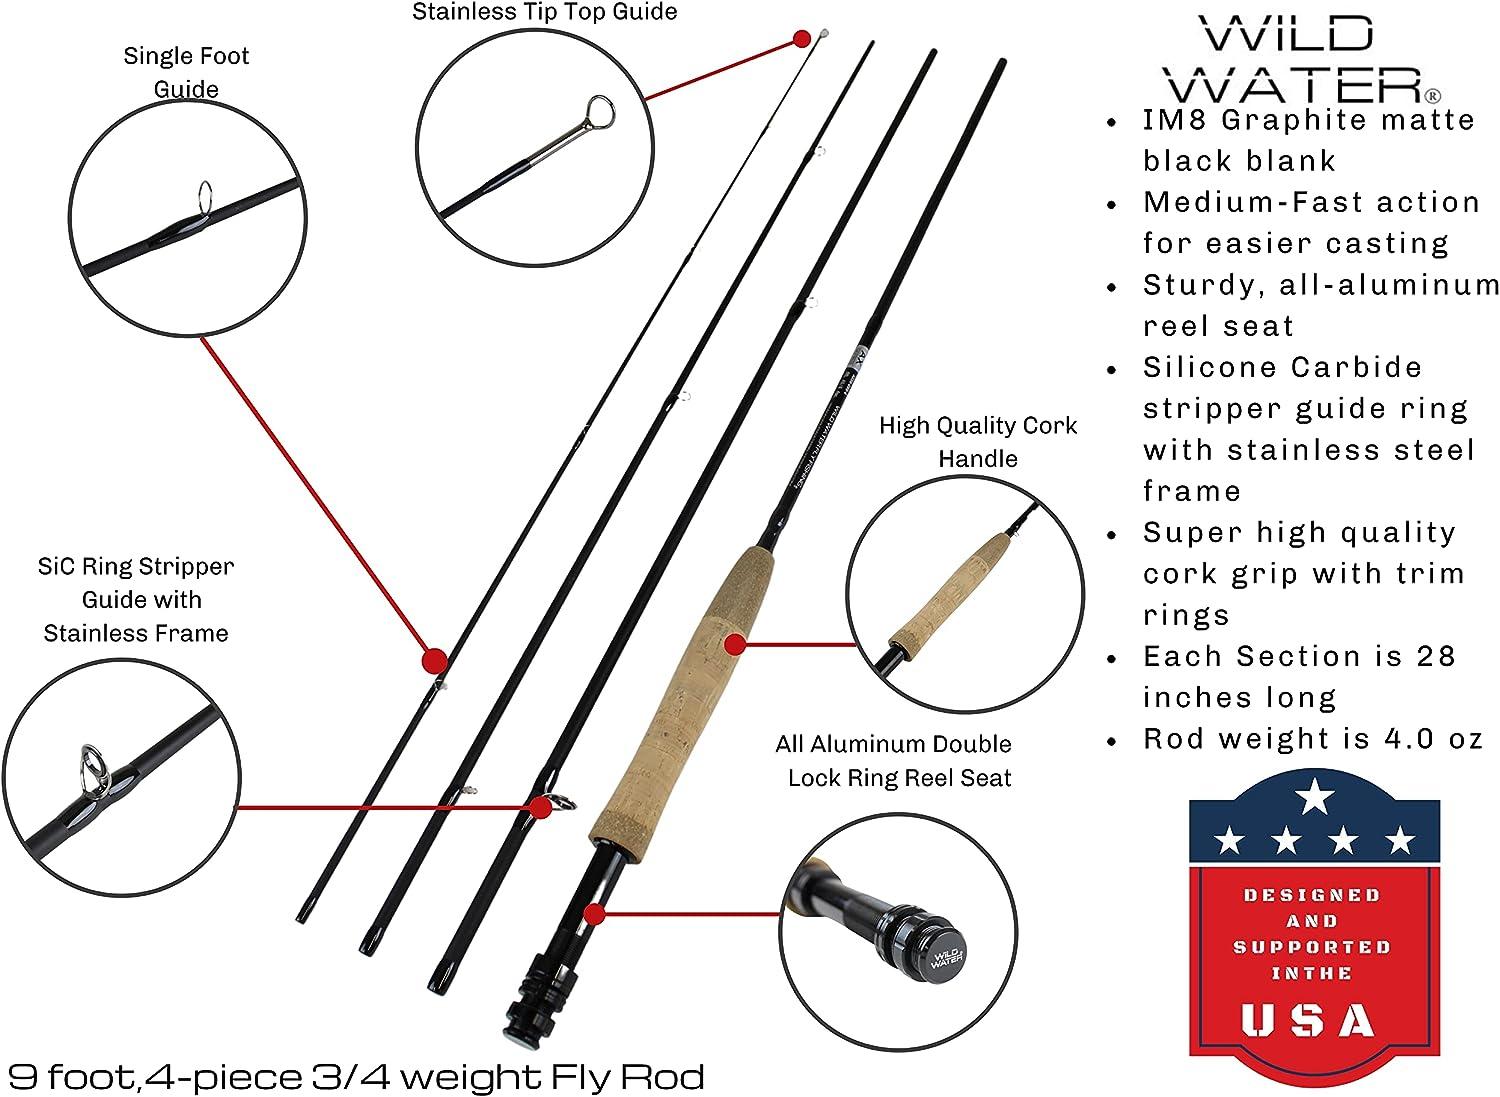 Wild Water Fly Fishing 9 Foot, 4-Piece, 3/4 Weight Fly Rod Deluxe